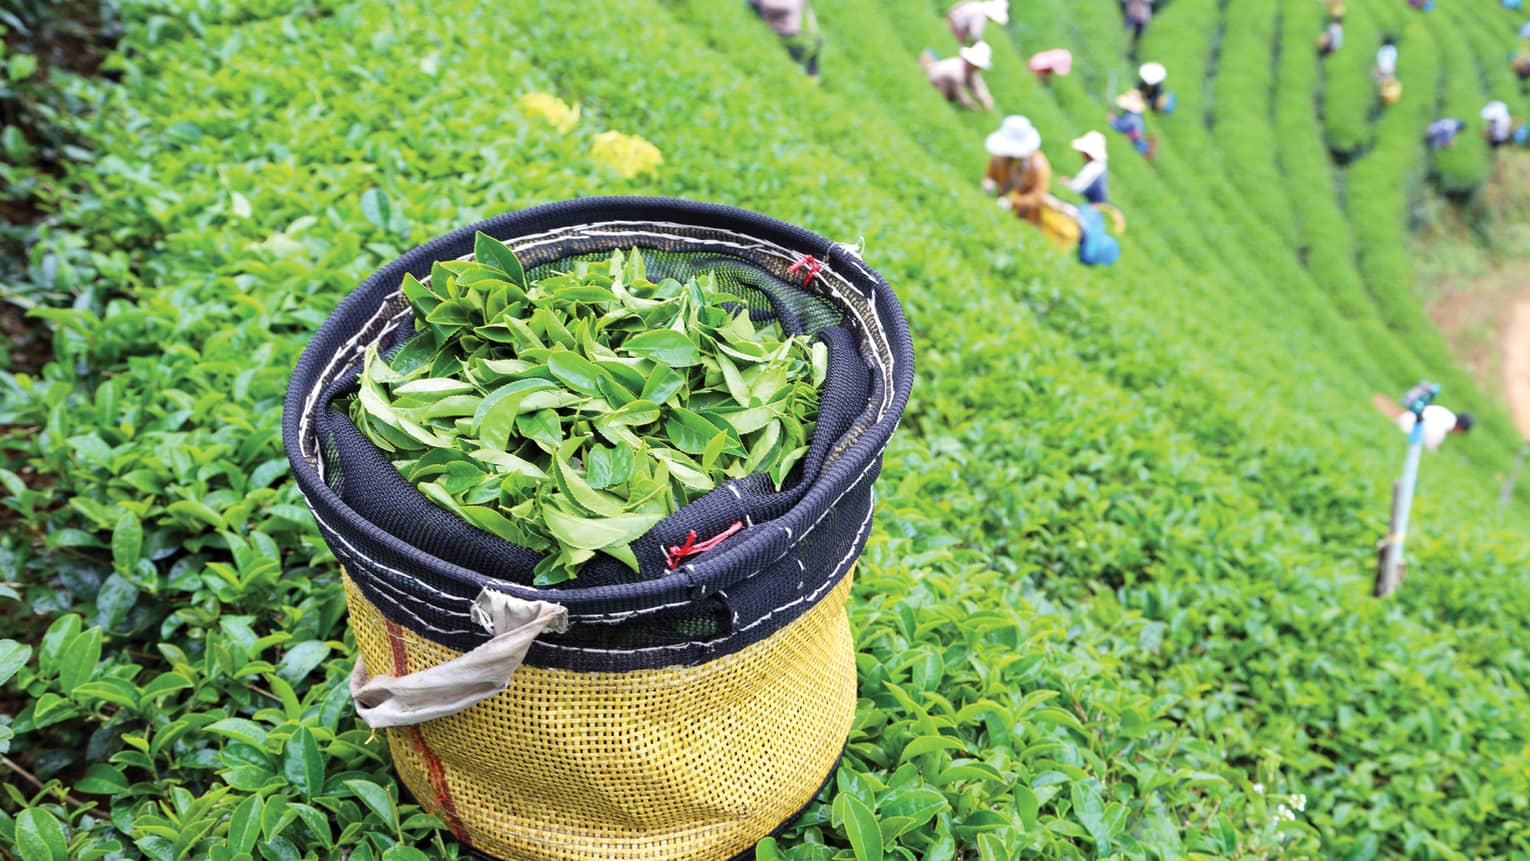 A basket filled with freshly picked tea leaves sits in a lush green tea plantation, with workers picking leaves in the background, creating a vibrant and lively scene.